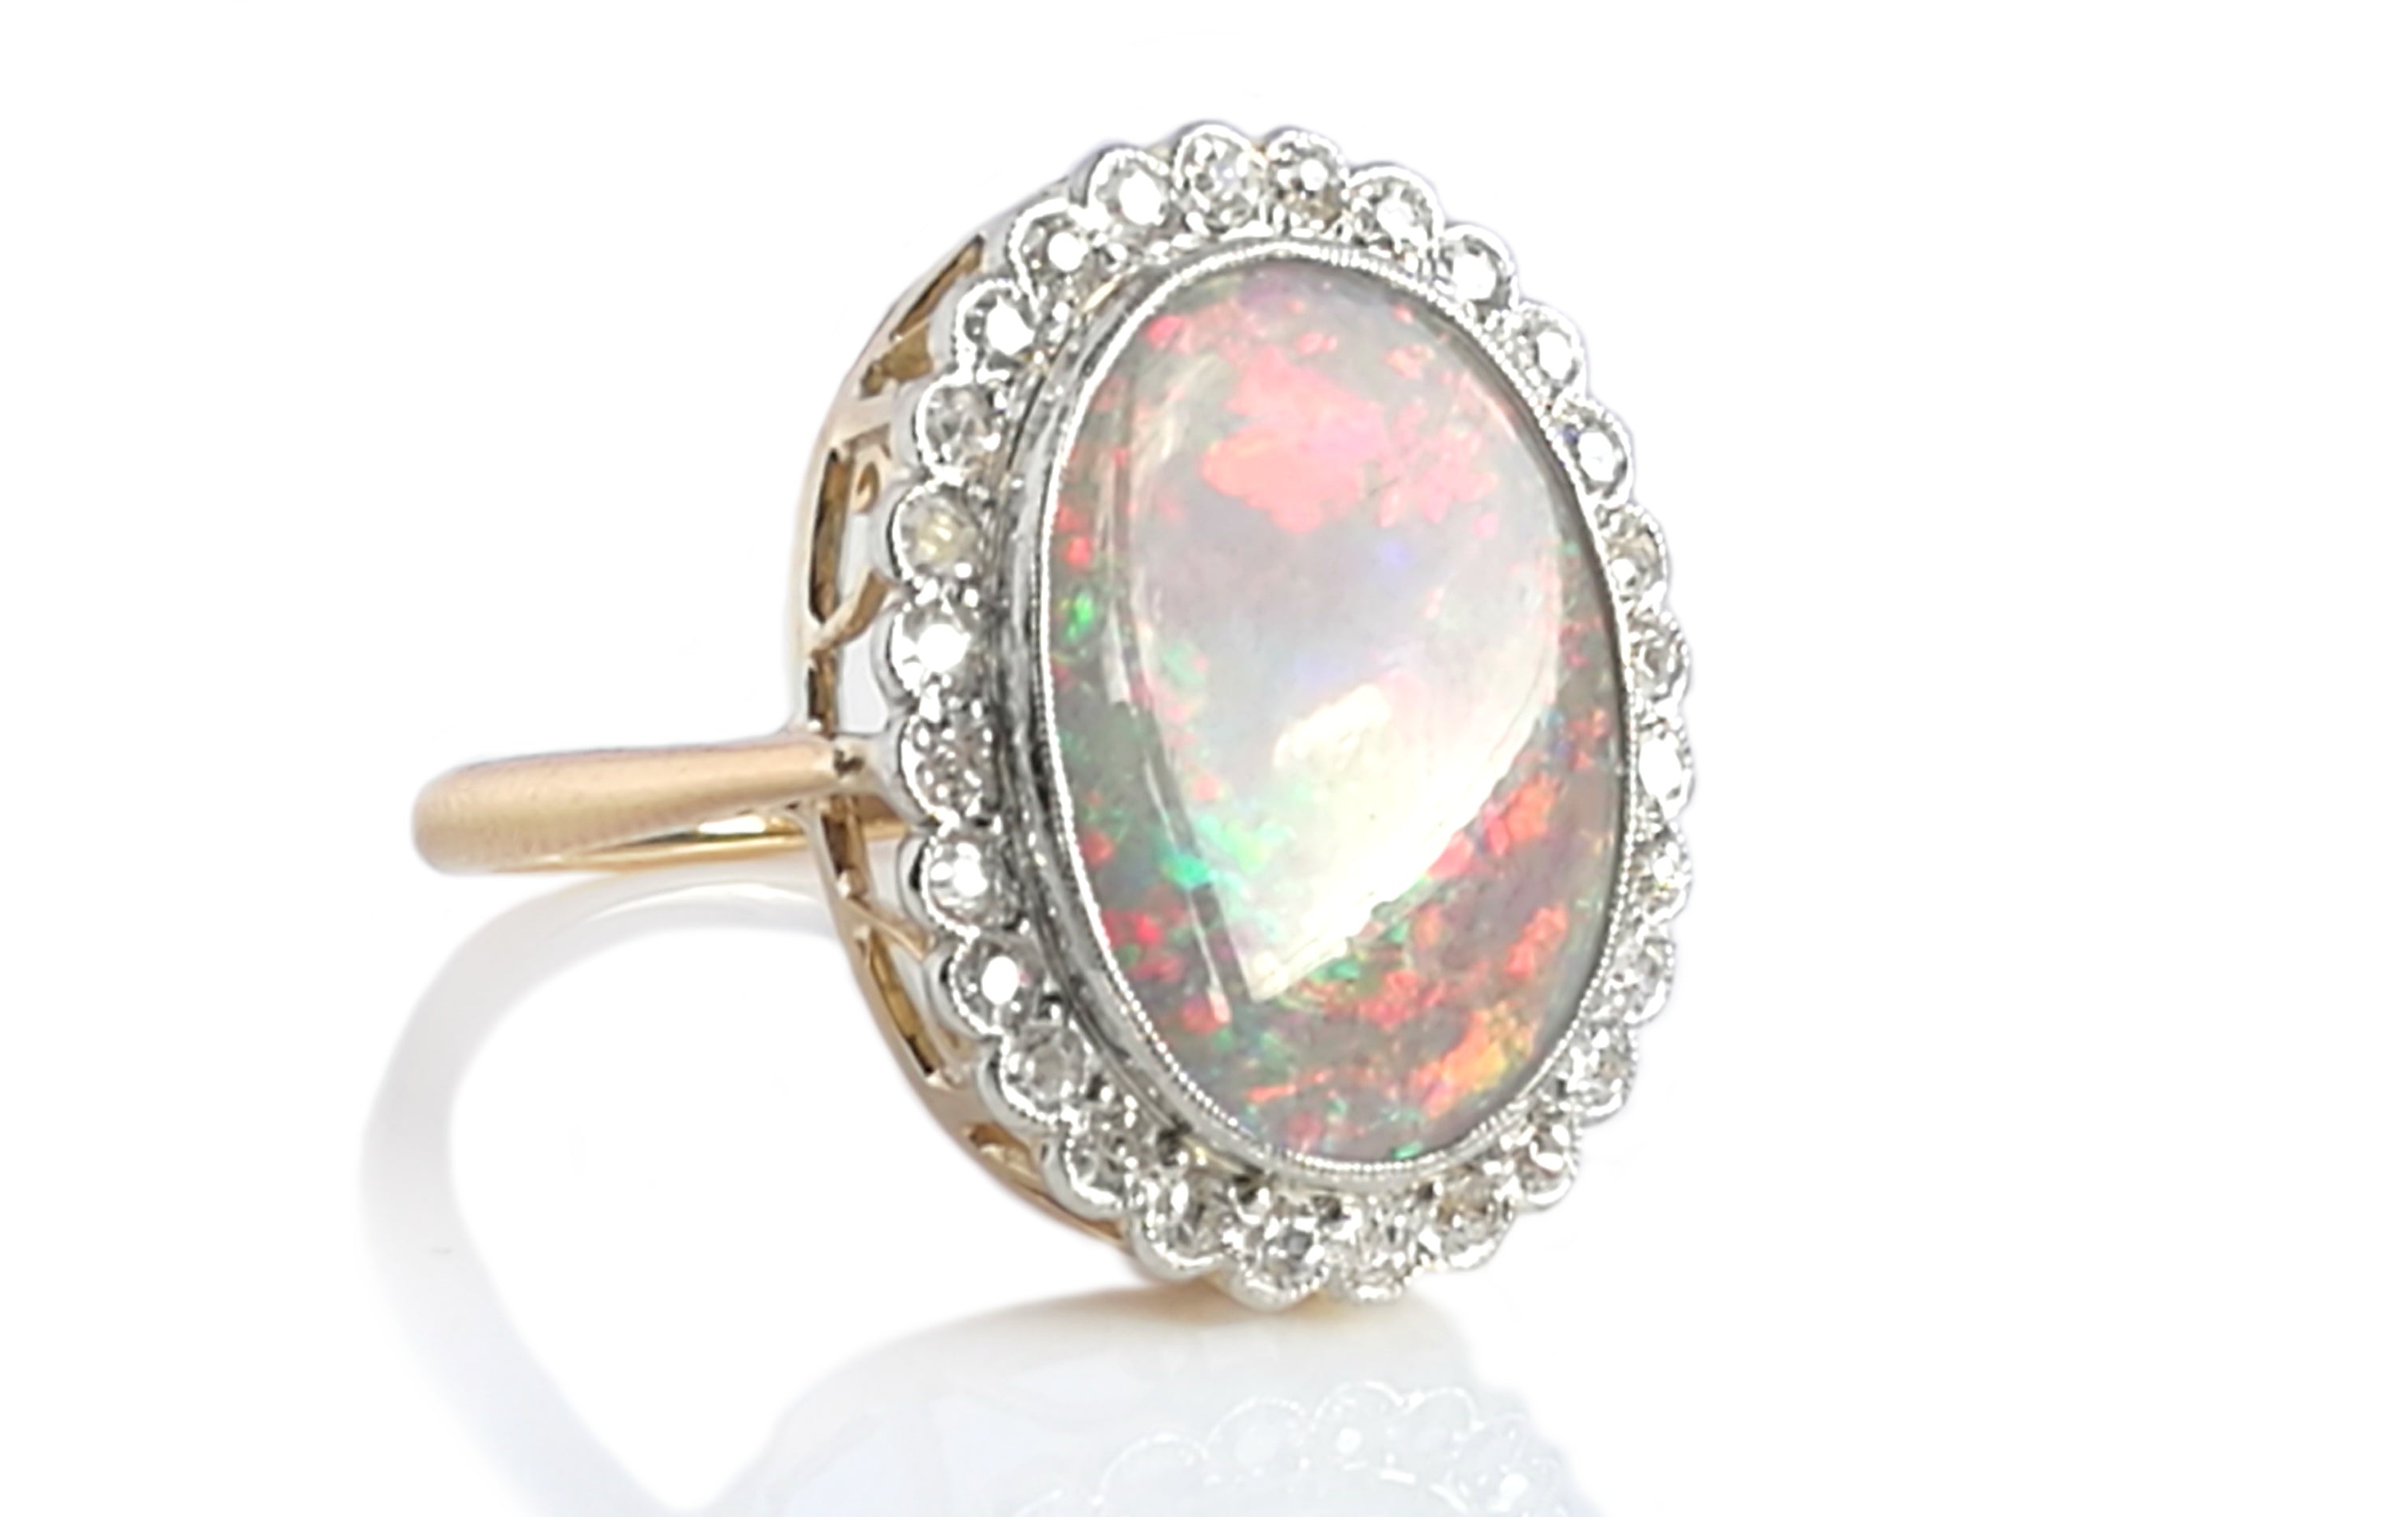 Antique Edwardian Victorian Opal & Old Cut Diamond Ring in 18k Yellow Gold